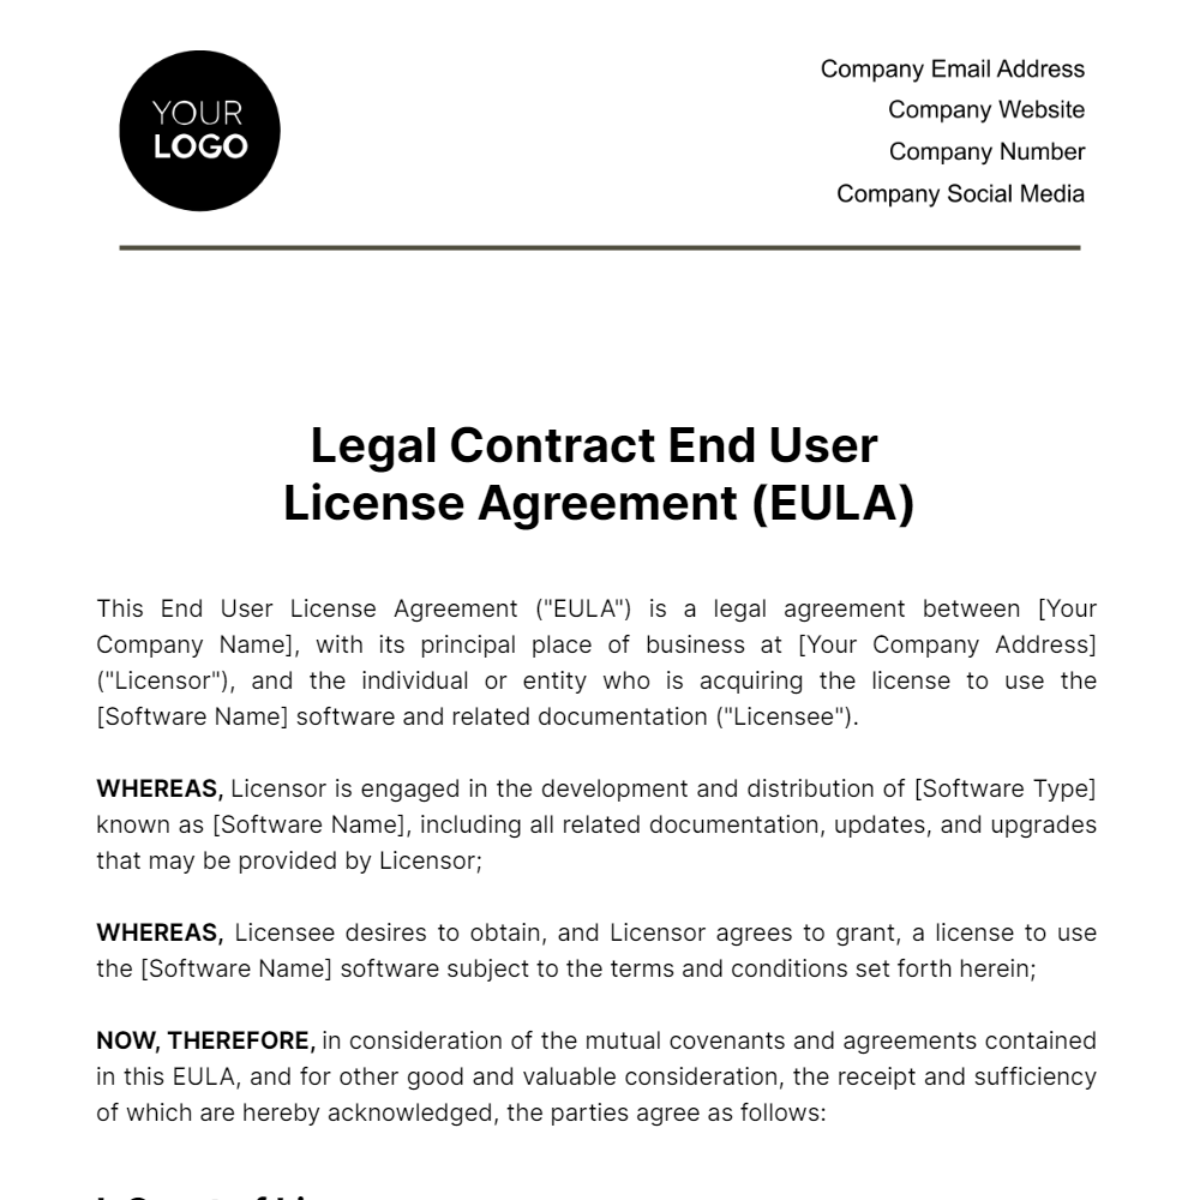 Free Legal Contract End User License Agreement (EULA) Template